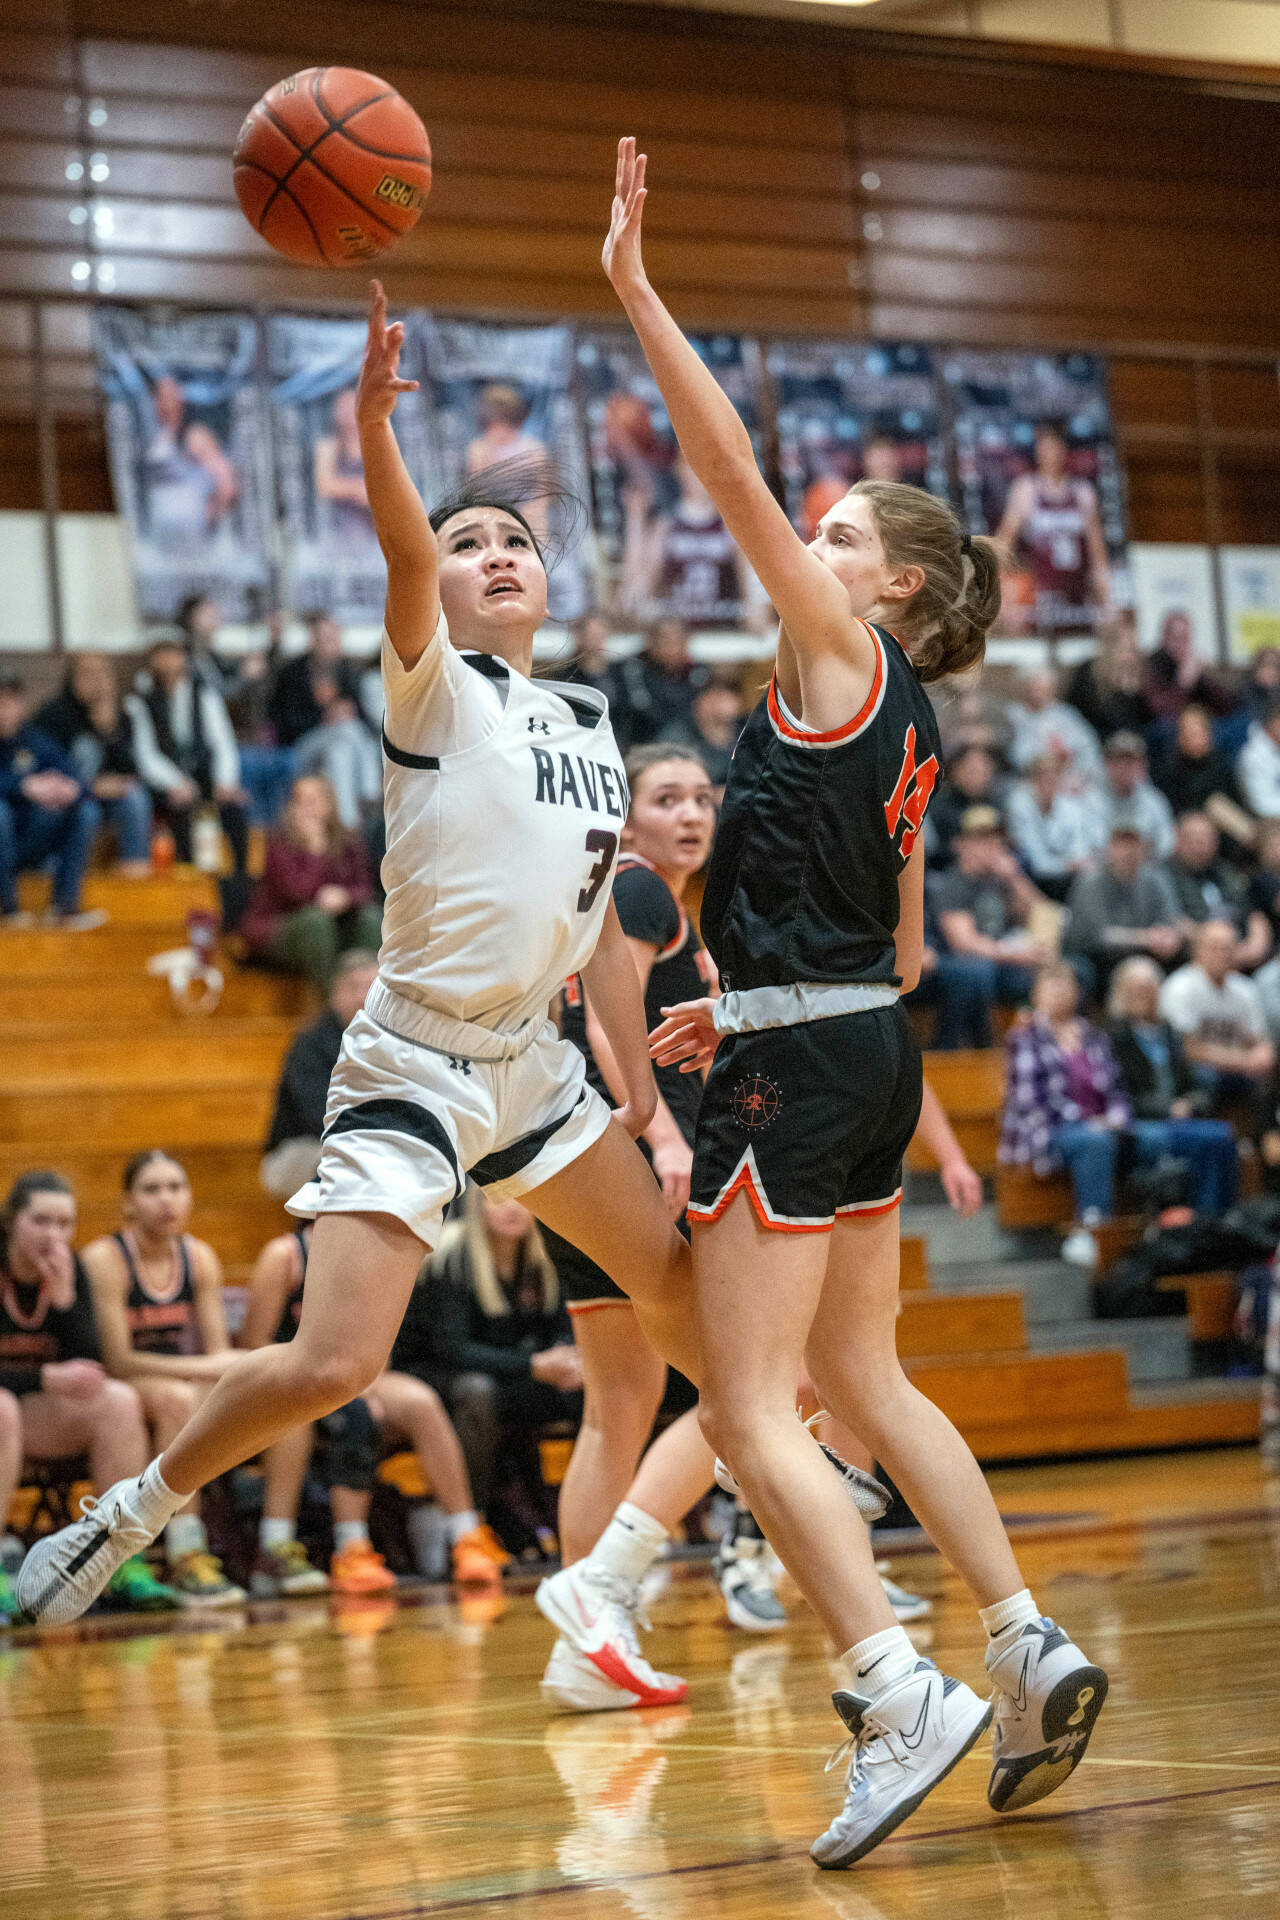 PHOTO BY FOREST WORGUM Raymond-South Bend guard Megan Kongbouakhay (3) puts up a shot against Rainier’s Anika Plowman during the Ravens’ 70-48 loss in the 2B District 4 Tournament on Tuesday in Montesano.